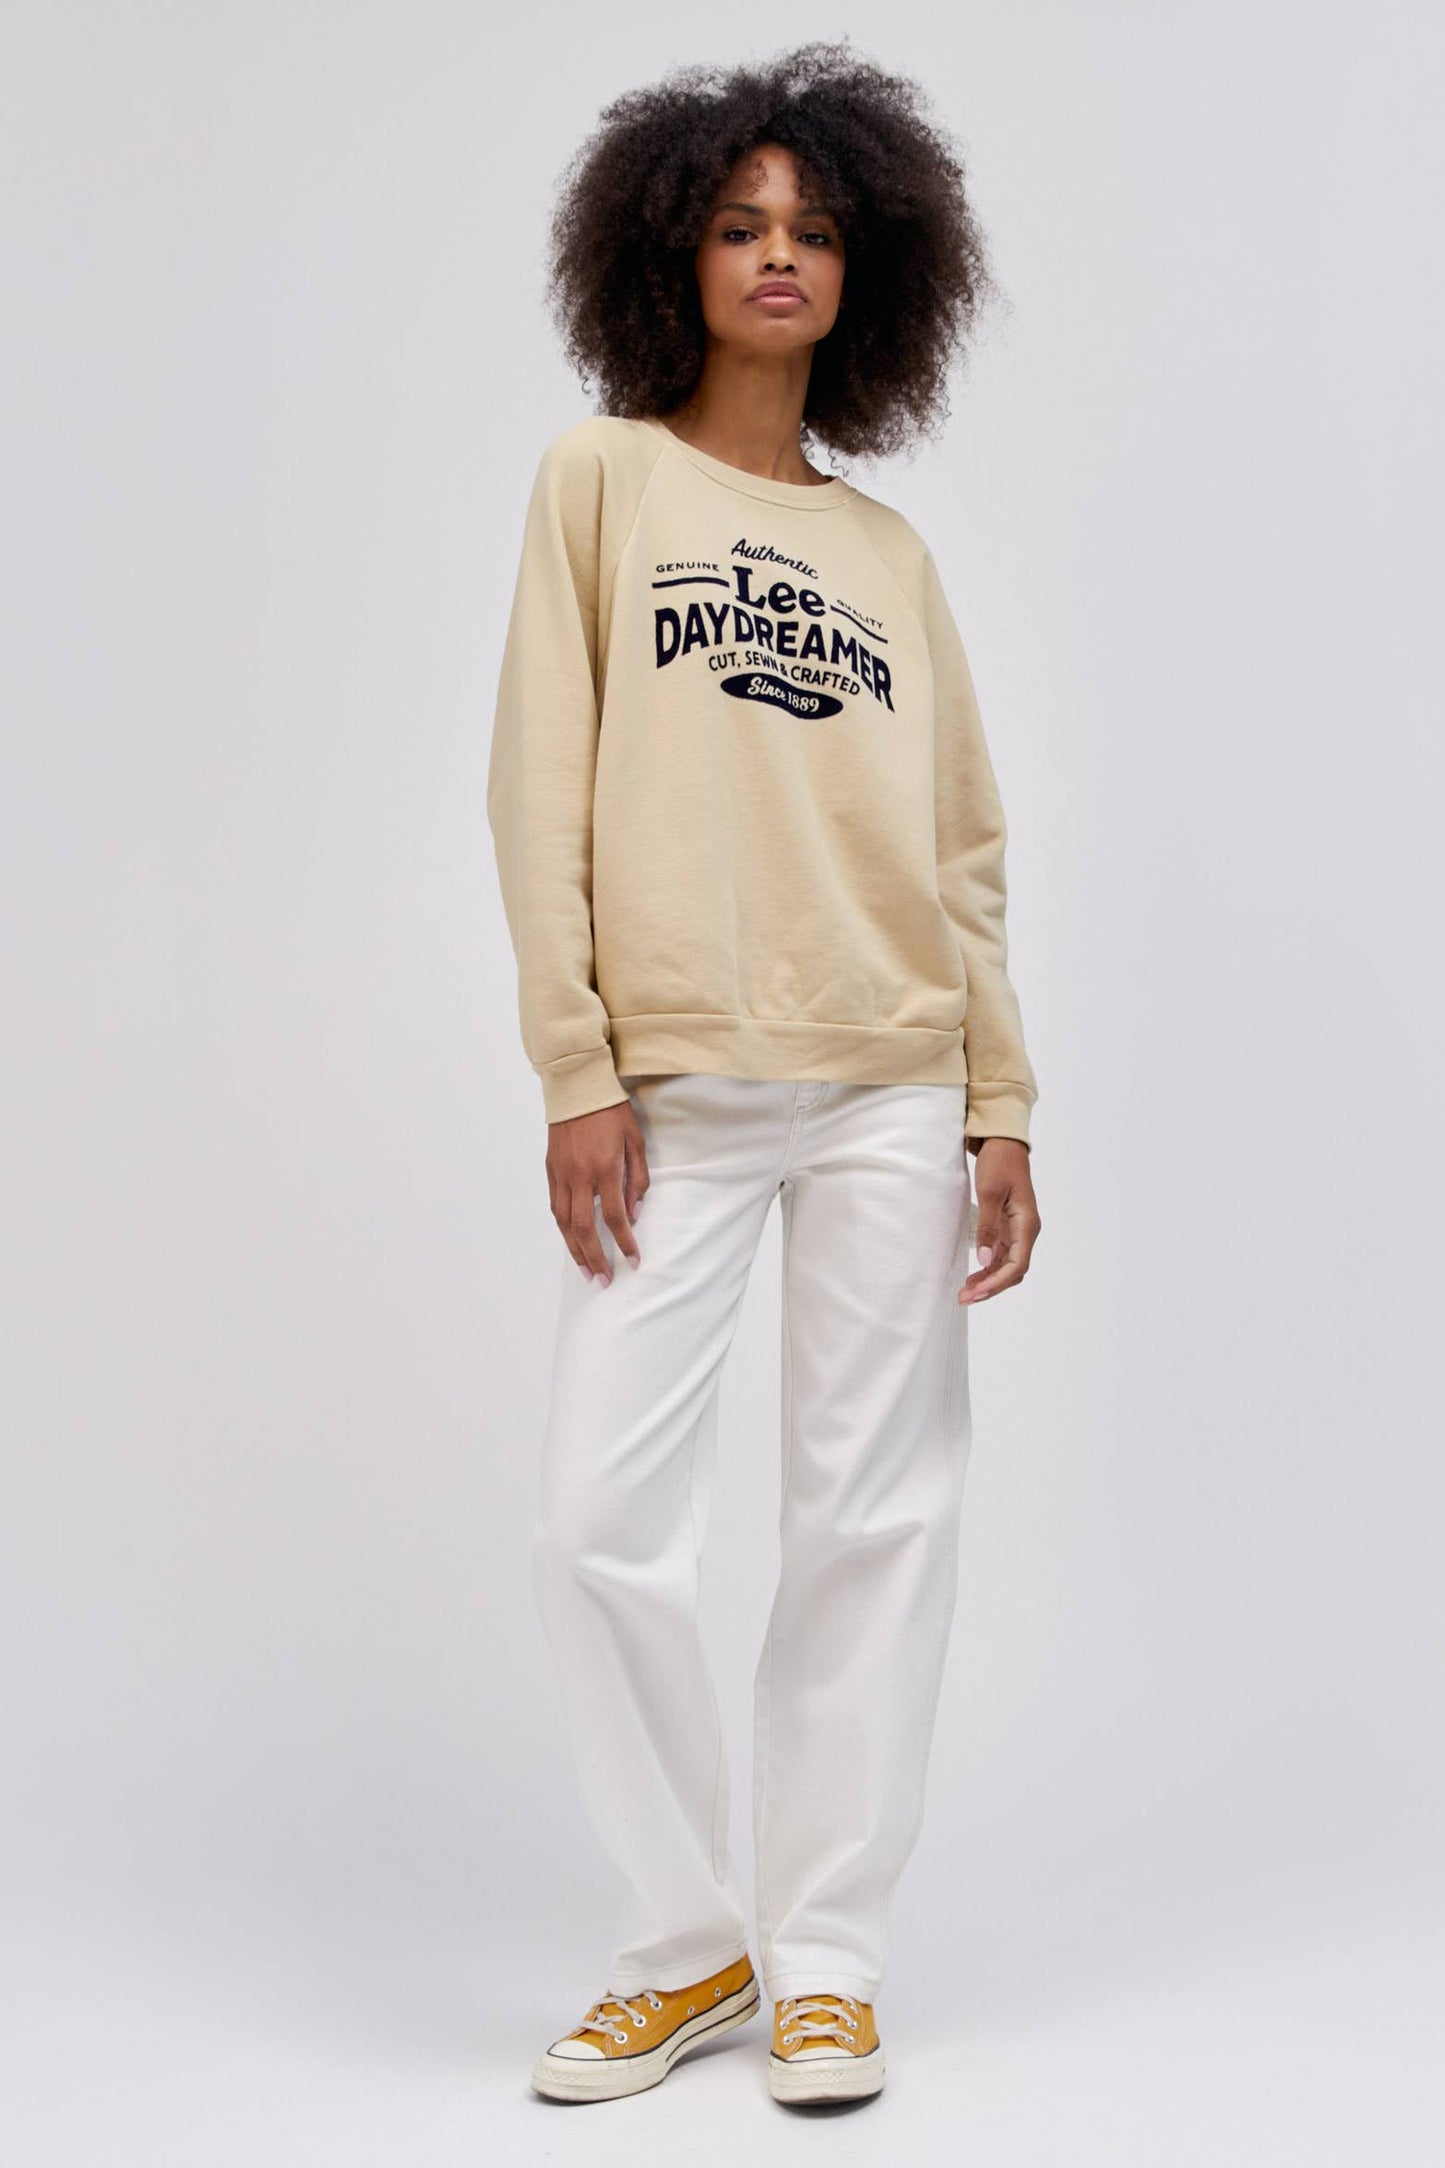 curly haired model wearing khaki colored sweatshirt and white workwear pants